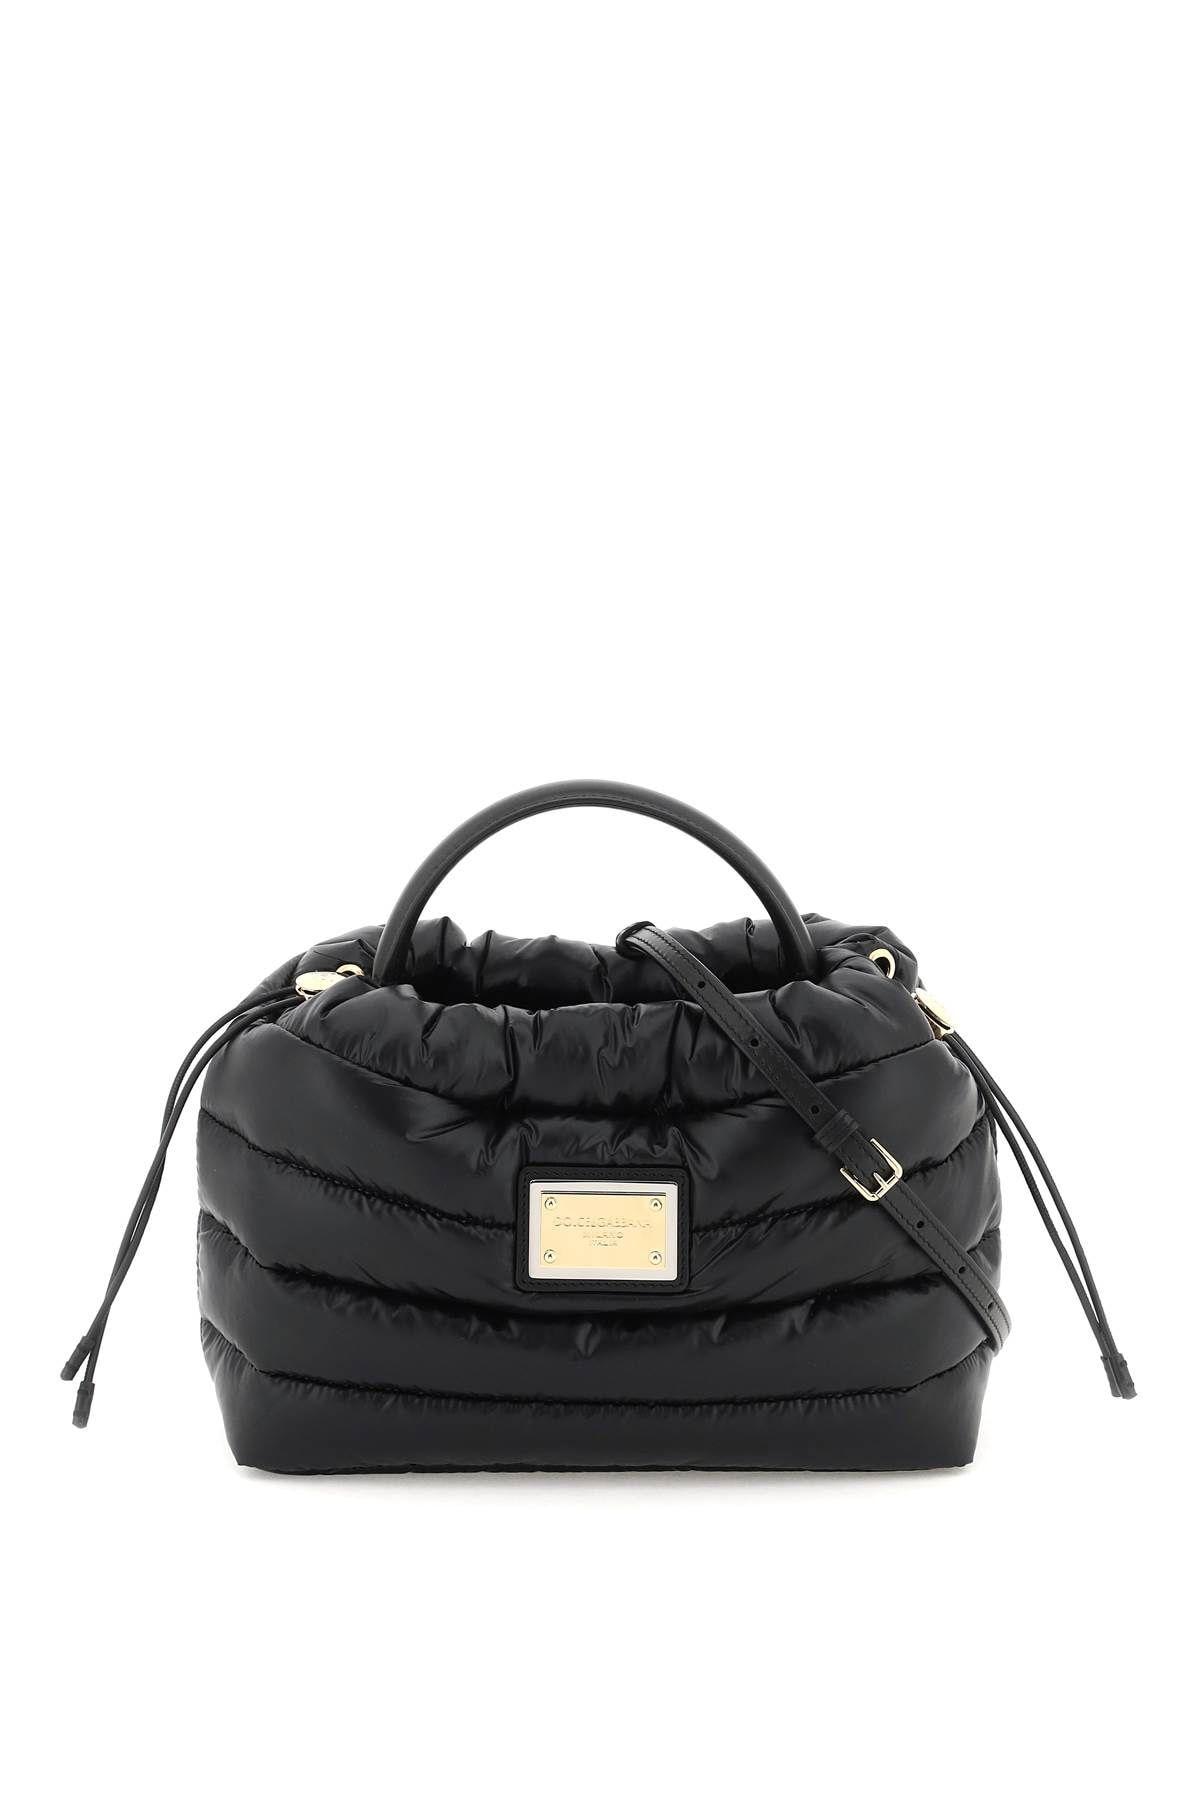 Dolce & Gabbana Leather And Nylon Cover Bag